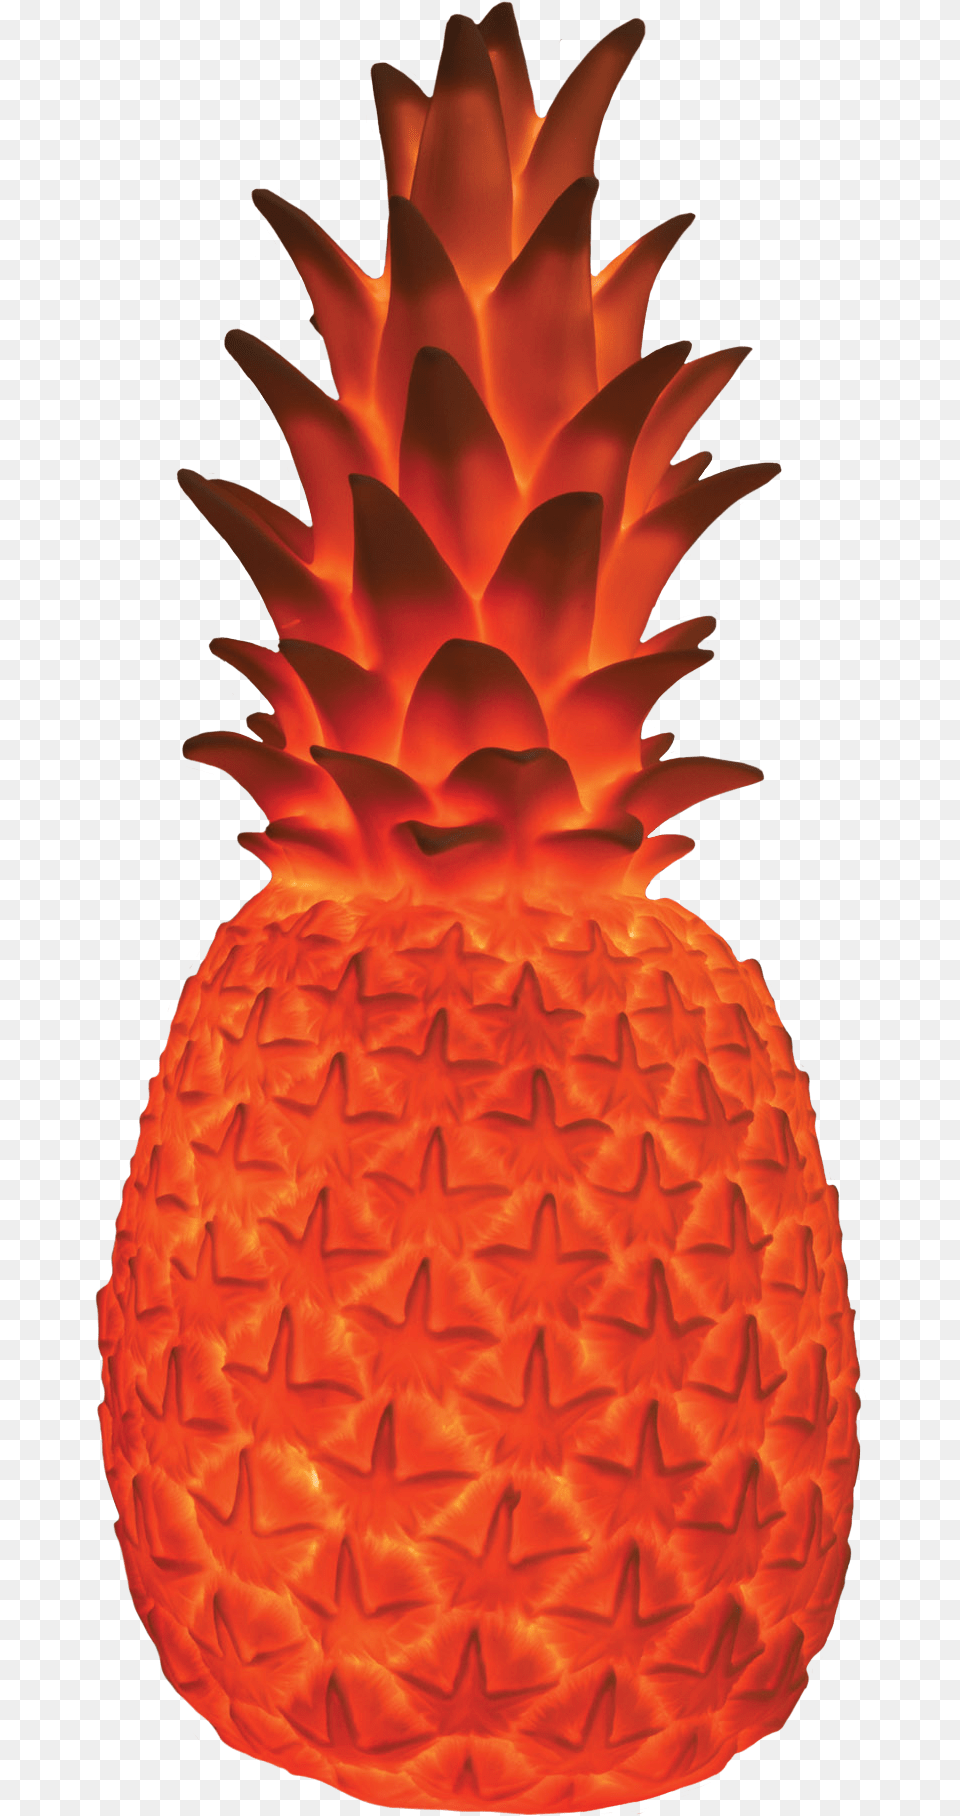 Goodnight Pineapple Pineapple Transparent Cartoon Red Pineapple, Produce, Food, Fruit, Plant Png Image